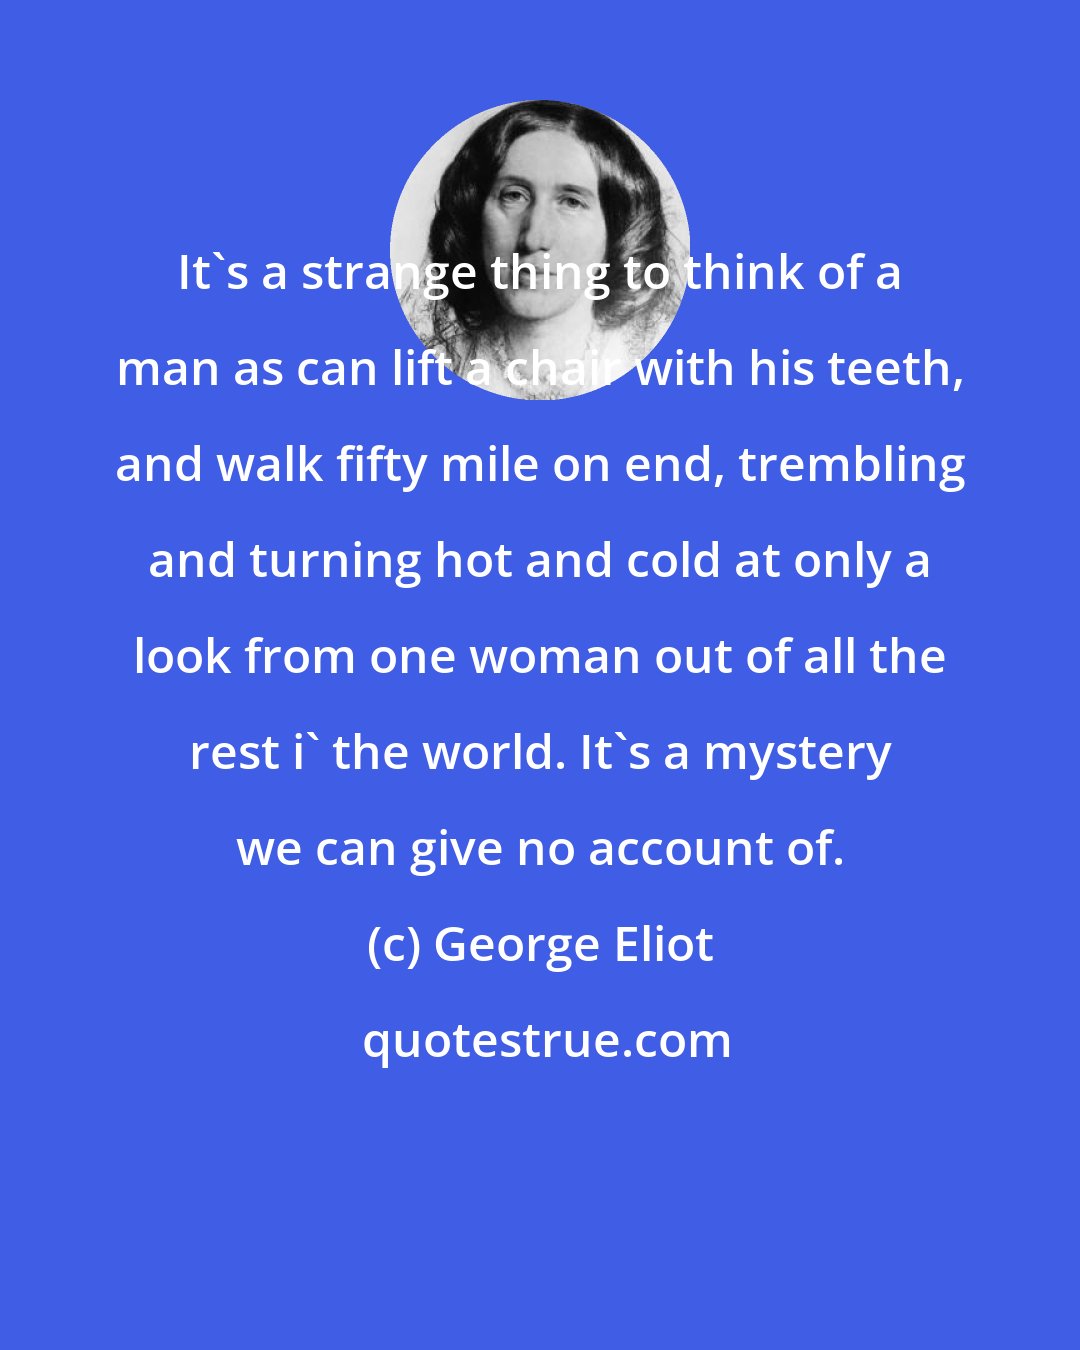 George Eliot: It's a strange thing to think of a man as can lift a chair with his teeth, and walk fifty mile on end, trembling and turning hot and cold at only a look from one woman out of all the rest i' the world. It's a mystery we can give no account of.